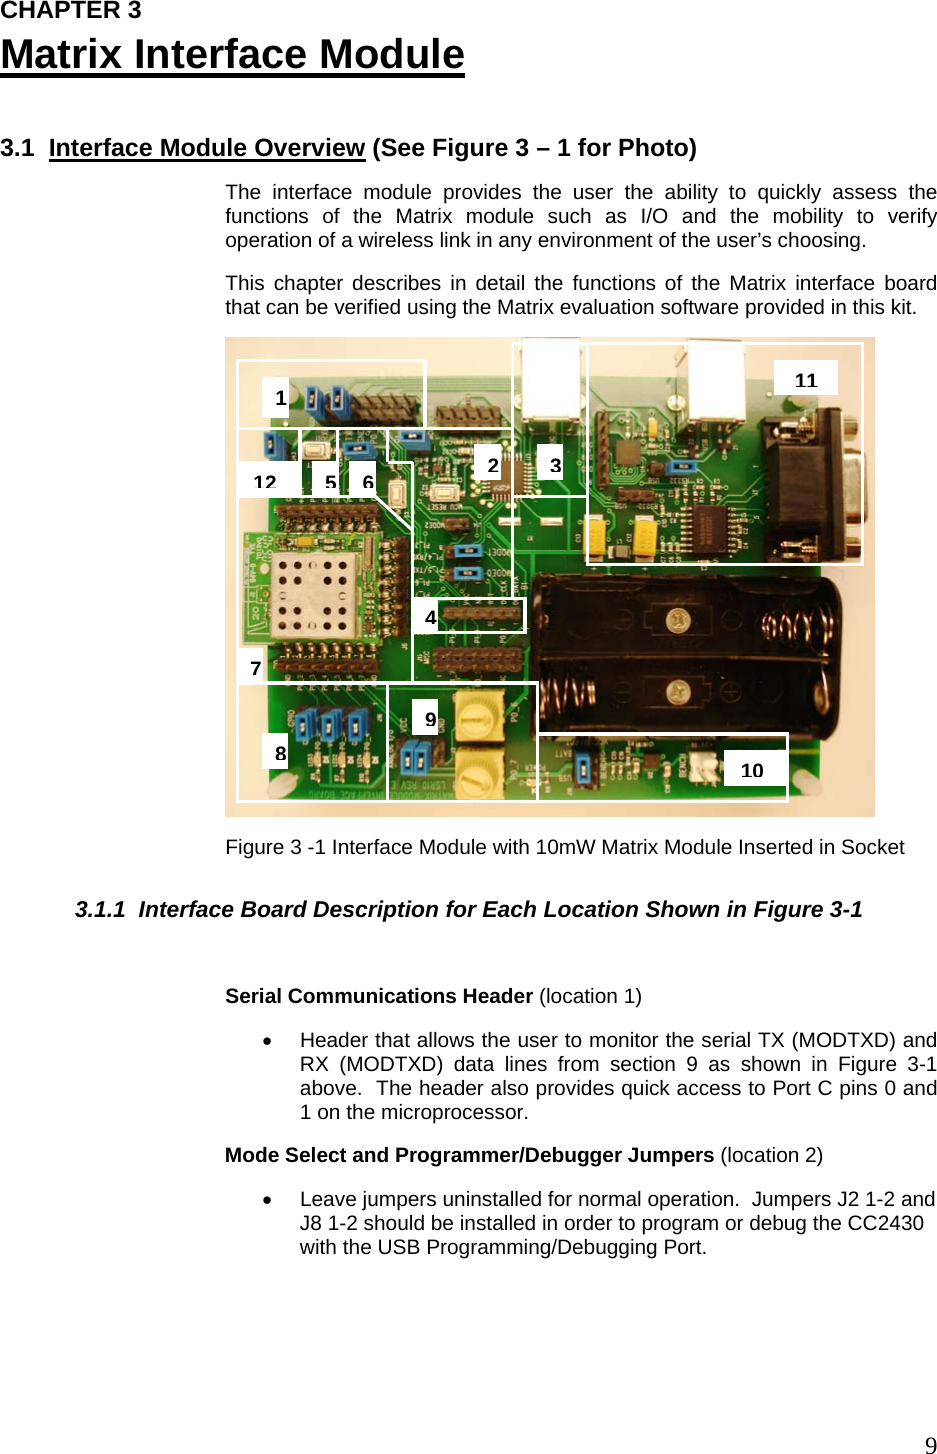  9CHAPTER 3 Matrix Interface Module  3.1  Interface Module Overview (See Figure 3 – 1 for Photo) The interface module provides the user the ability to quickly assess the functions of the Matrix module such as I/O and the mobility to verify operation of a wireless link in any environment of the user’s choosing.   This chapter describes in detail the functions of the Matrix interface board that can be verified using the Matrix evaluation software provided in this kit.  Figure 3 -1 Interface Module with 10mW Matrix Module Inserted in Socket 3.1.1  Interface Board Description for Each Location Shown in Figure 3-1  Serial Communications Header (location 1) •  Header that allows the user to monitor the serial TX (MODTXD) and RX (MODTXD) data lines from section 9 as shown in Figure 3-1 above.  The header also provides quick access to Port C pins 0 and 1 on the microprocessor. Mode Select and Programmer/Debugger Jumpers (location 2) •  Leave jumpers uninstalled for normal operation.  Jumpers J2 1-2 and J8 1-2 should be installed in order to program or debug the CC2430 with the USB Programming/Debugging Port.  101 891112354276